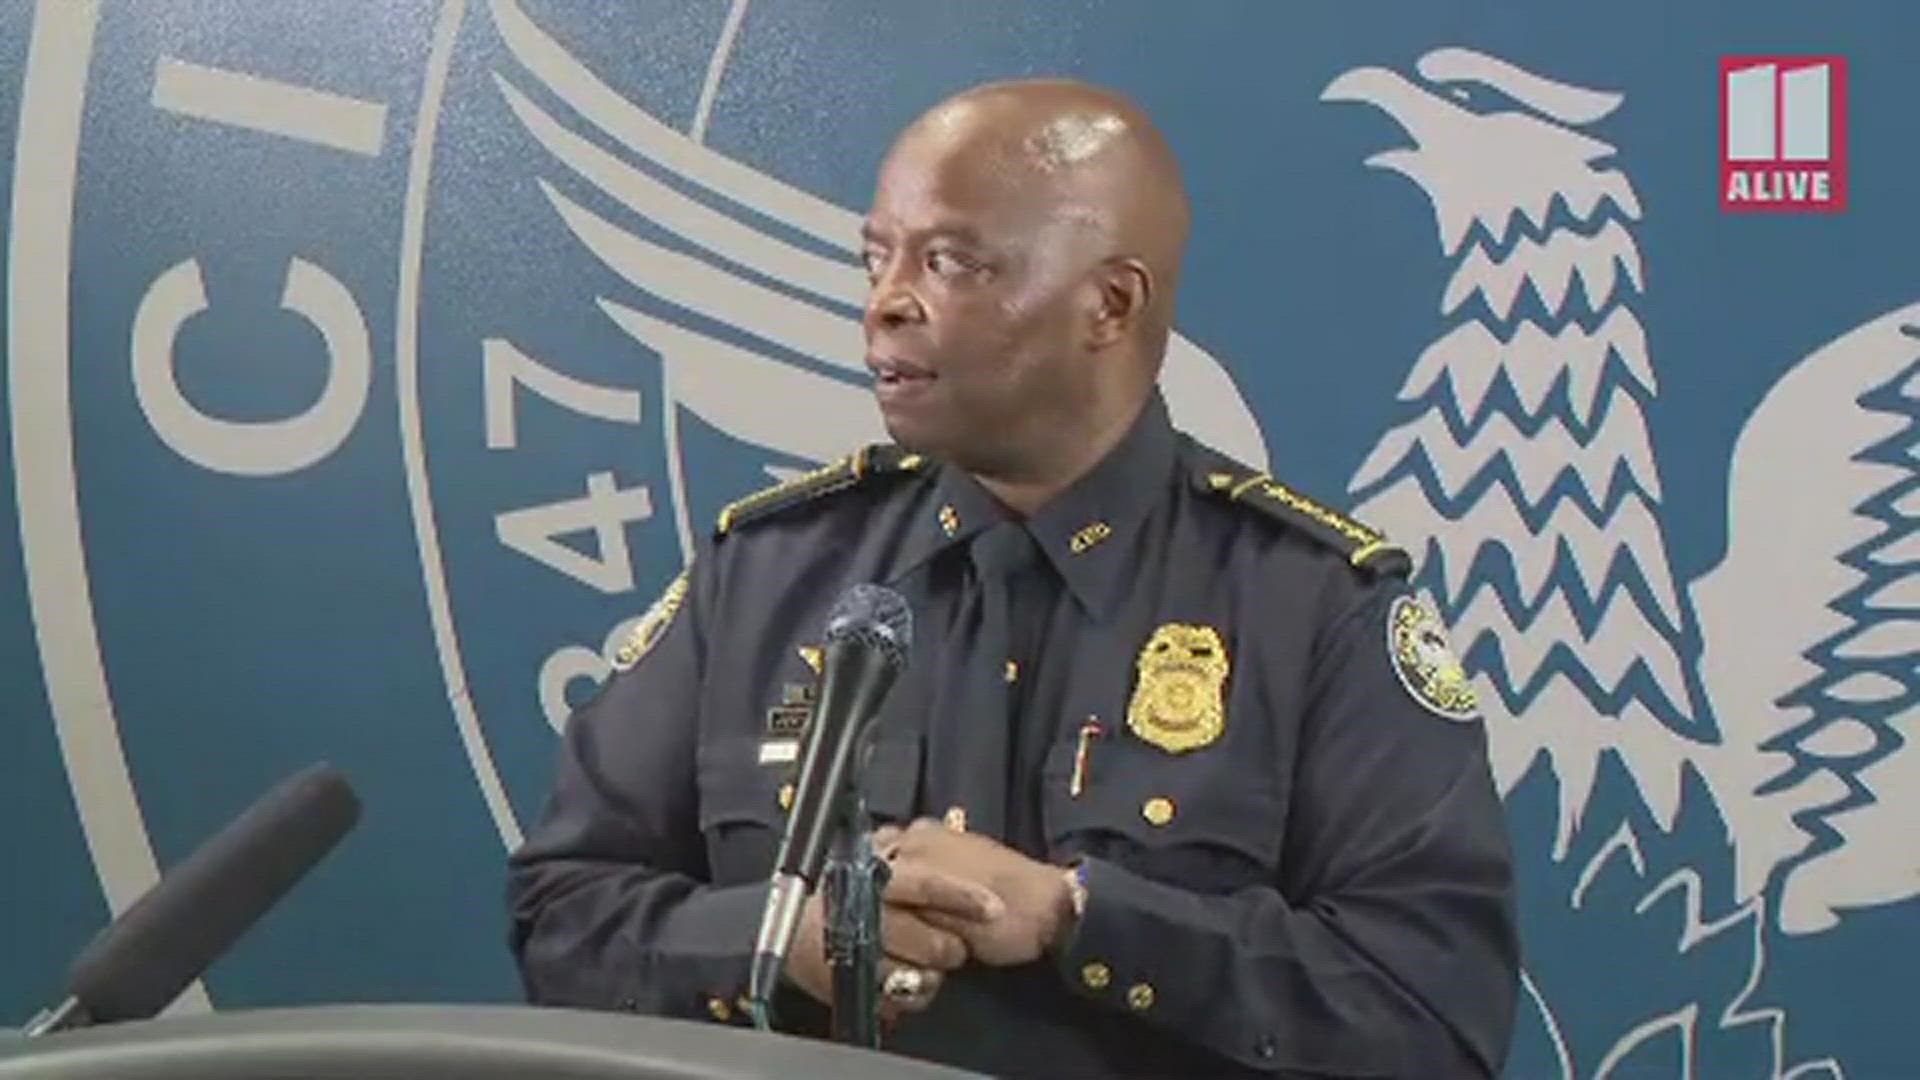 Chief Rodney Bryant was named the new permanent APD chief this week.